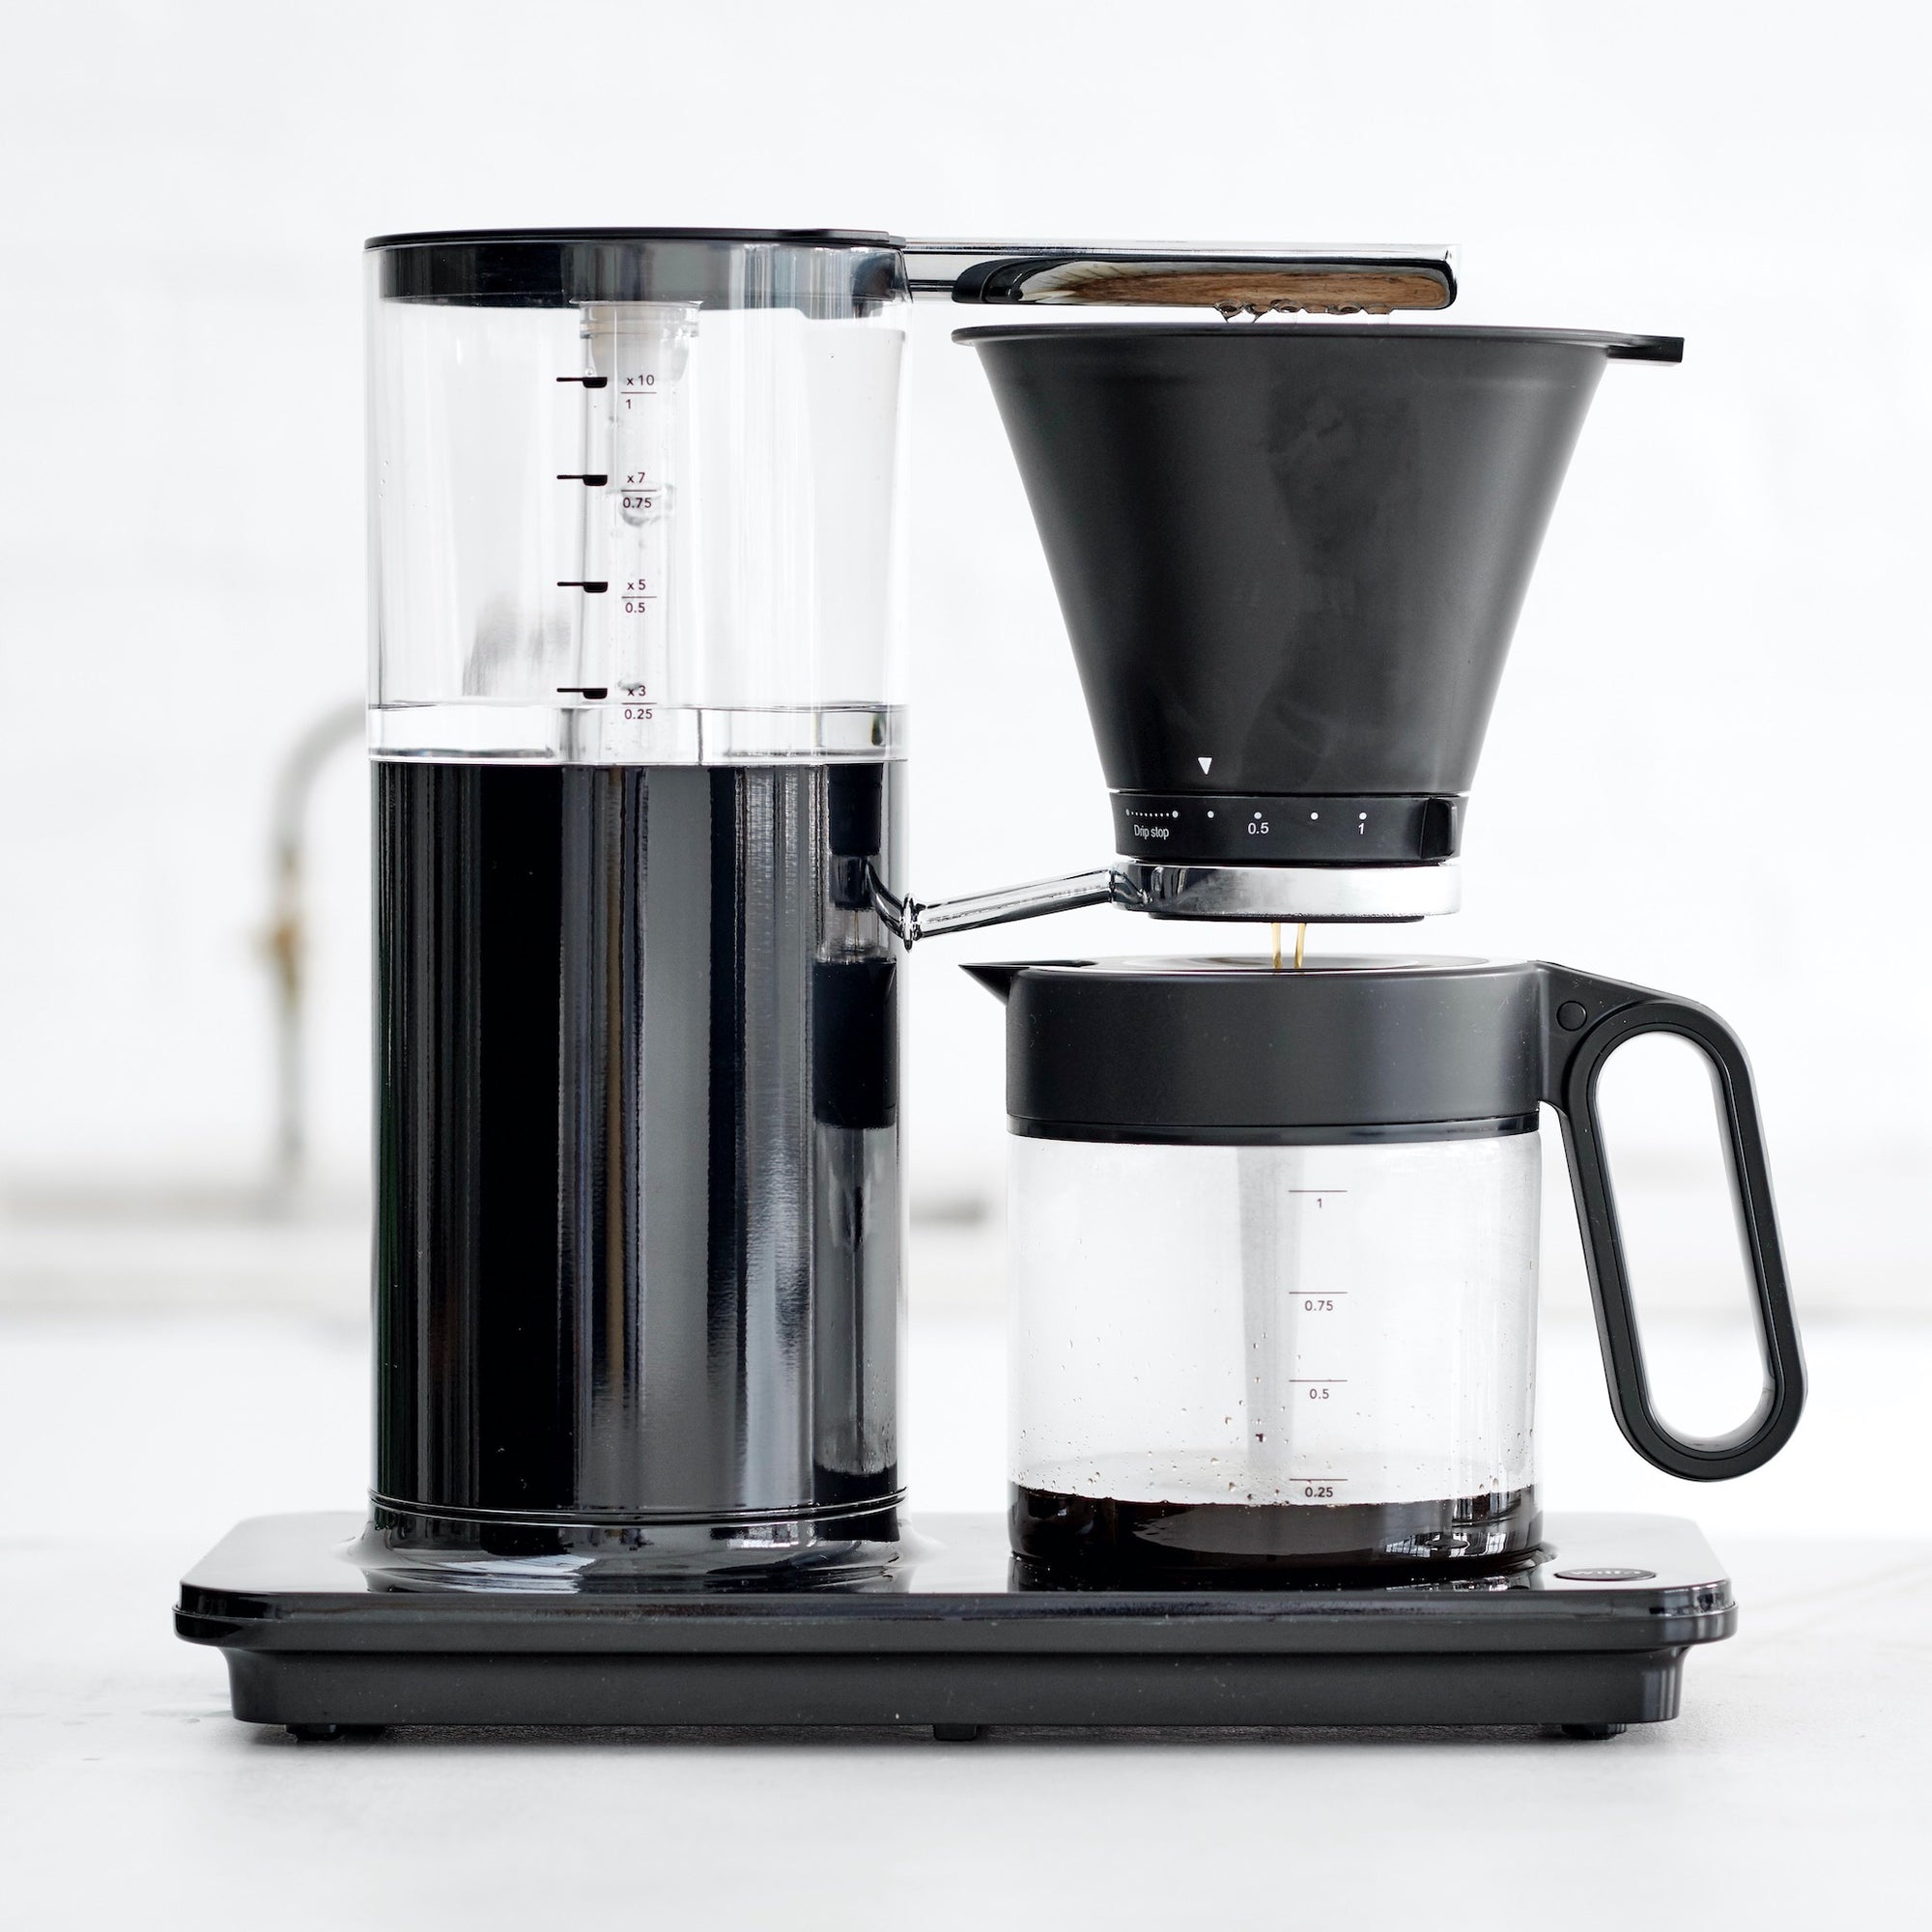 The Best Home Coffee Brewing Machine: Wilfa?  Wilfa's latest brewer has a  pretty respectable brew time (around three and a half minutes) - but do its  other features make it my